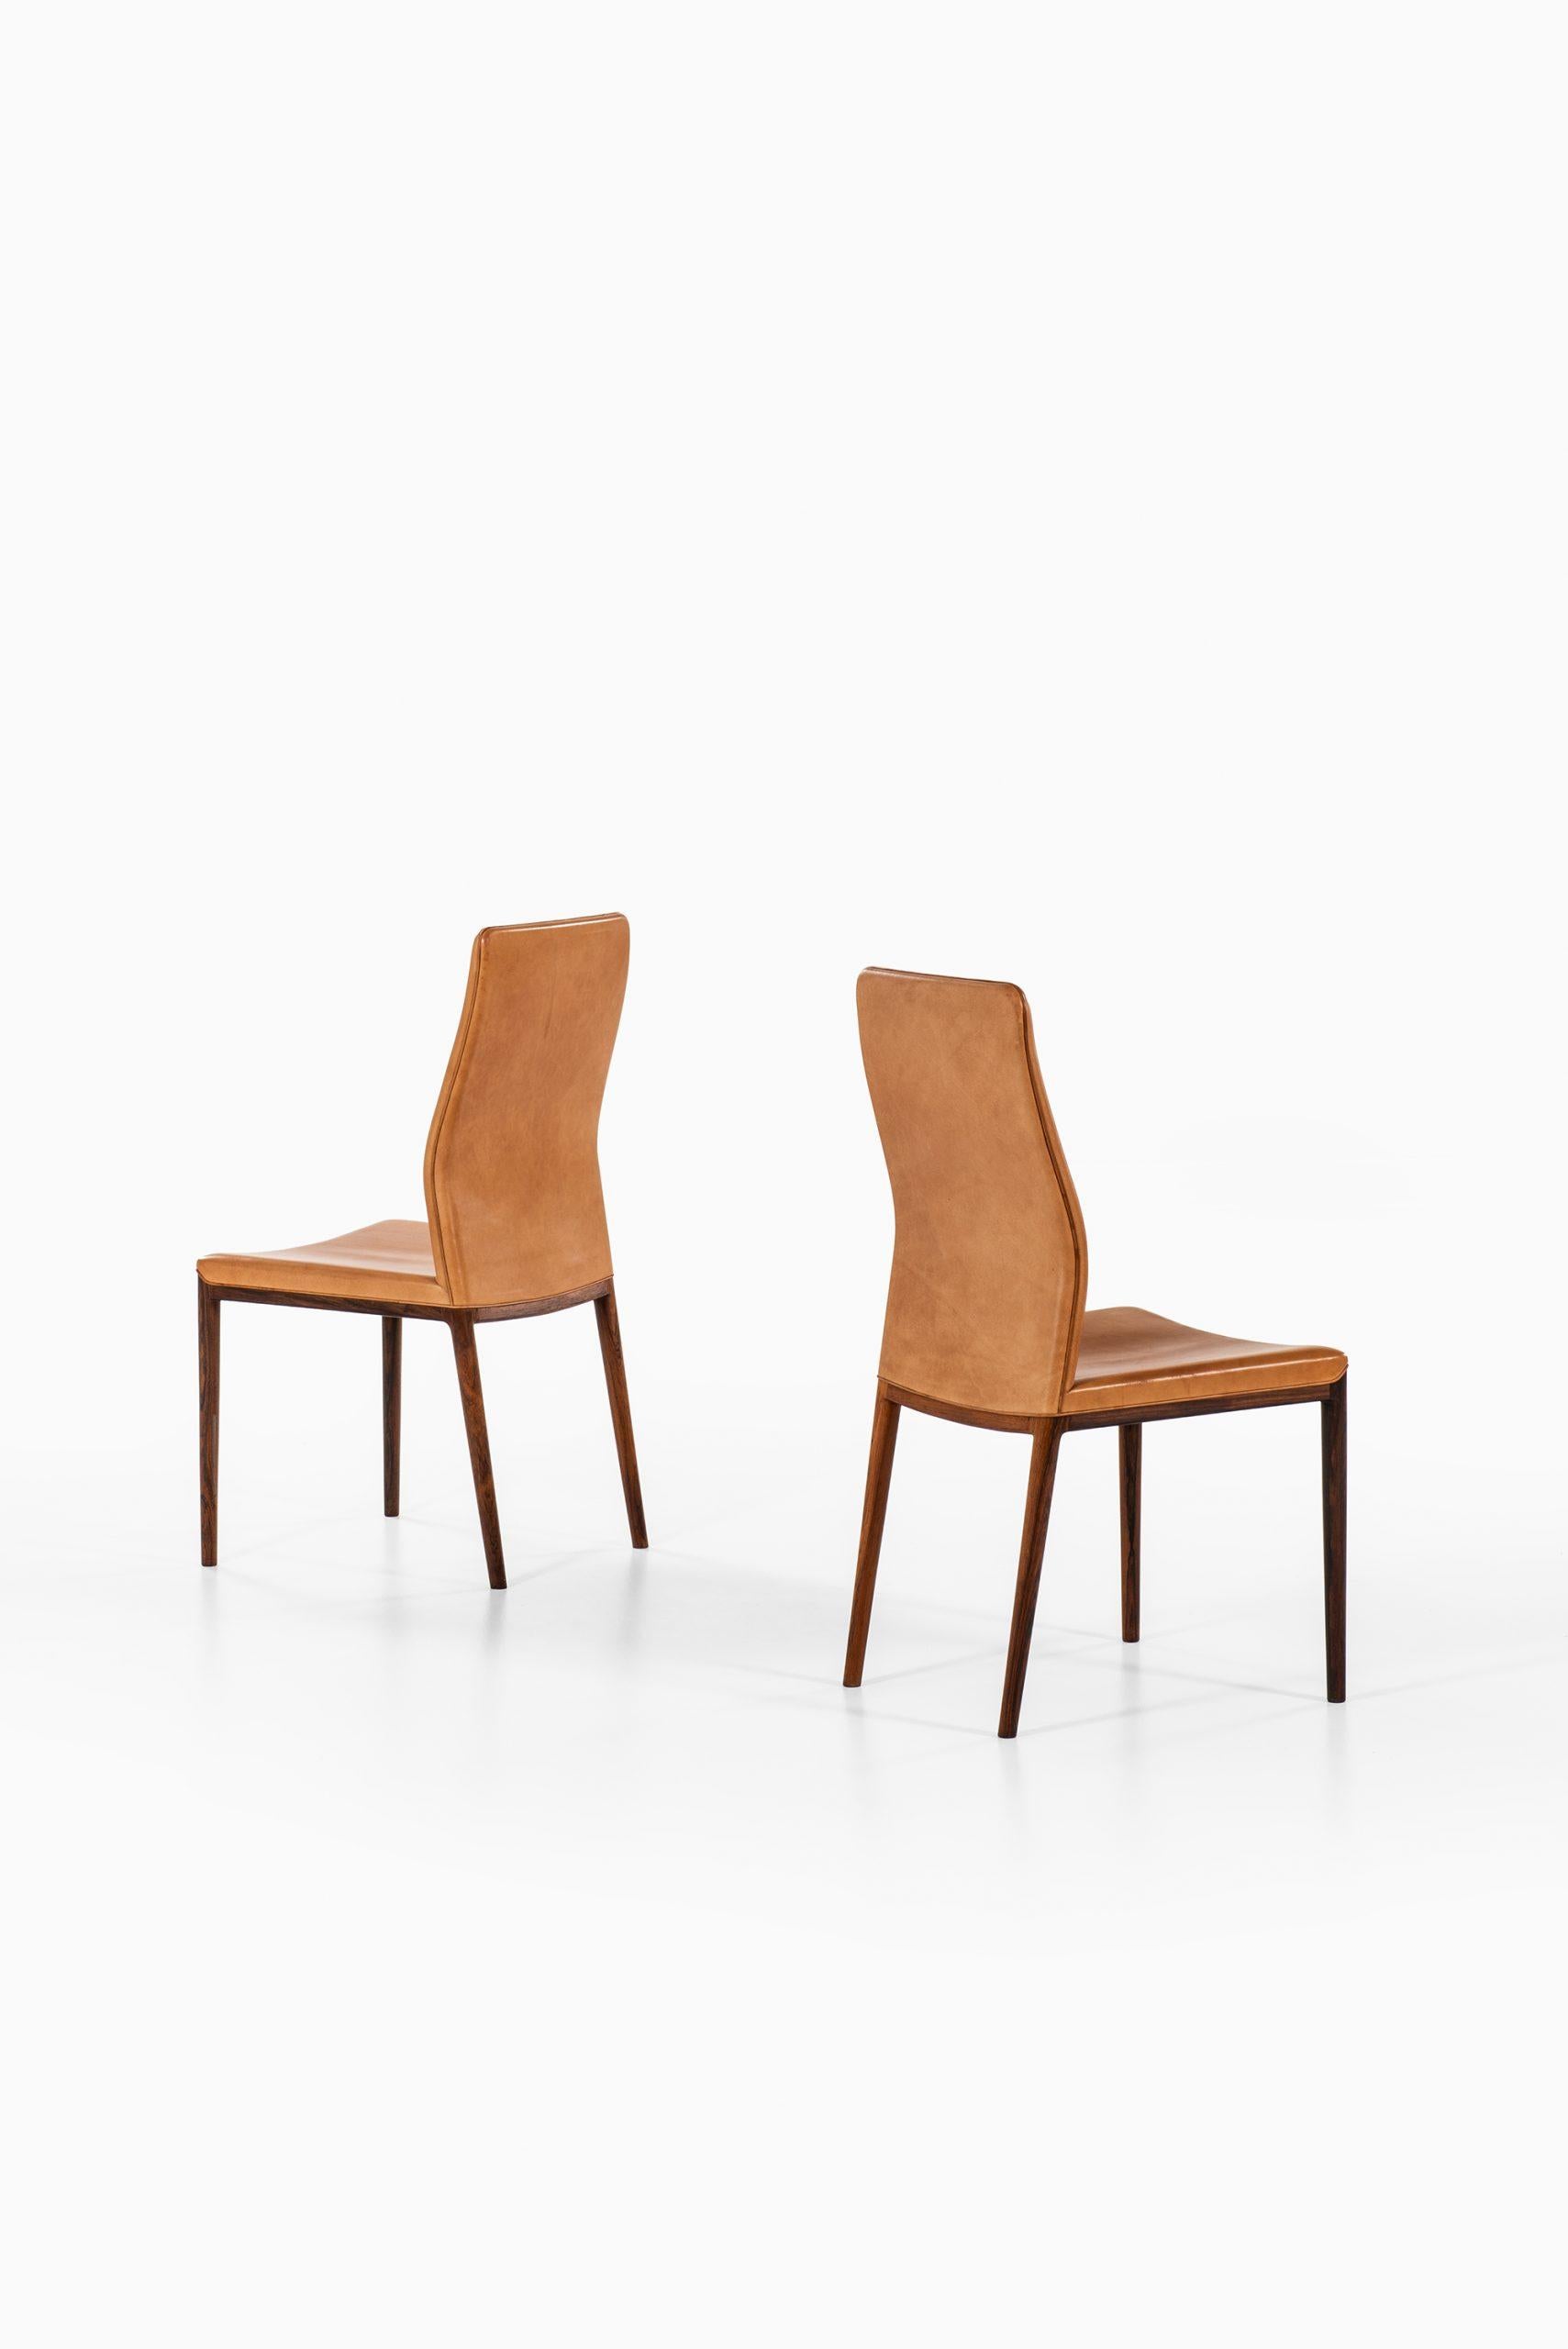 Helge Vestergaard Jensen Dining Chairs Produced by P. Jensen & Co. Cabinetmakers For Sale 1